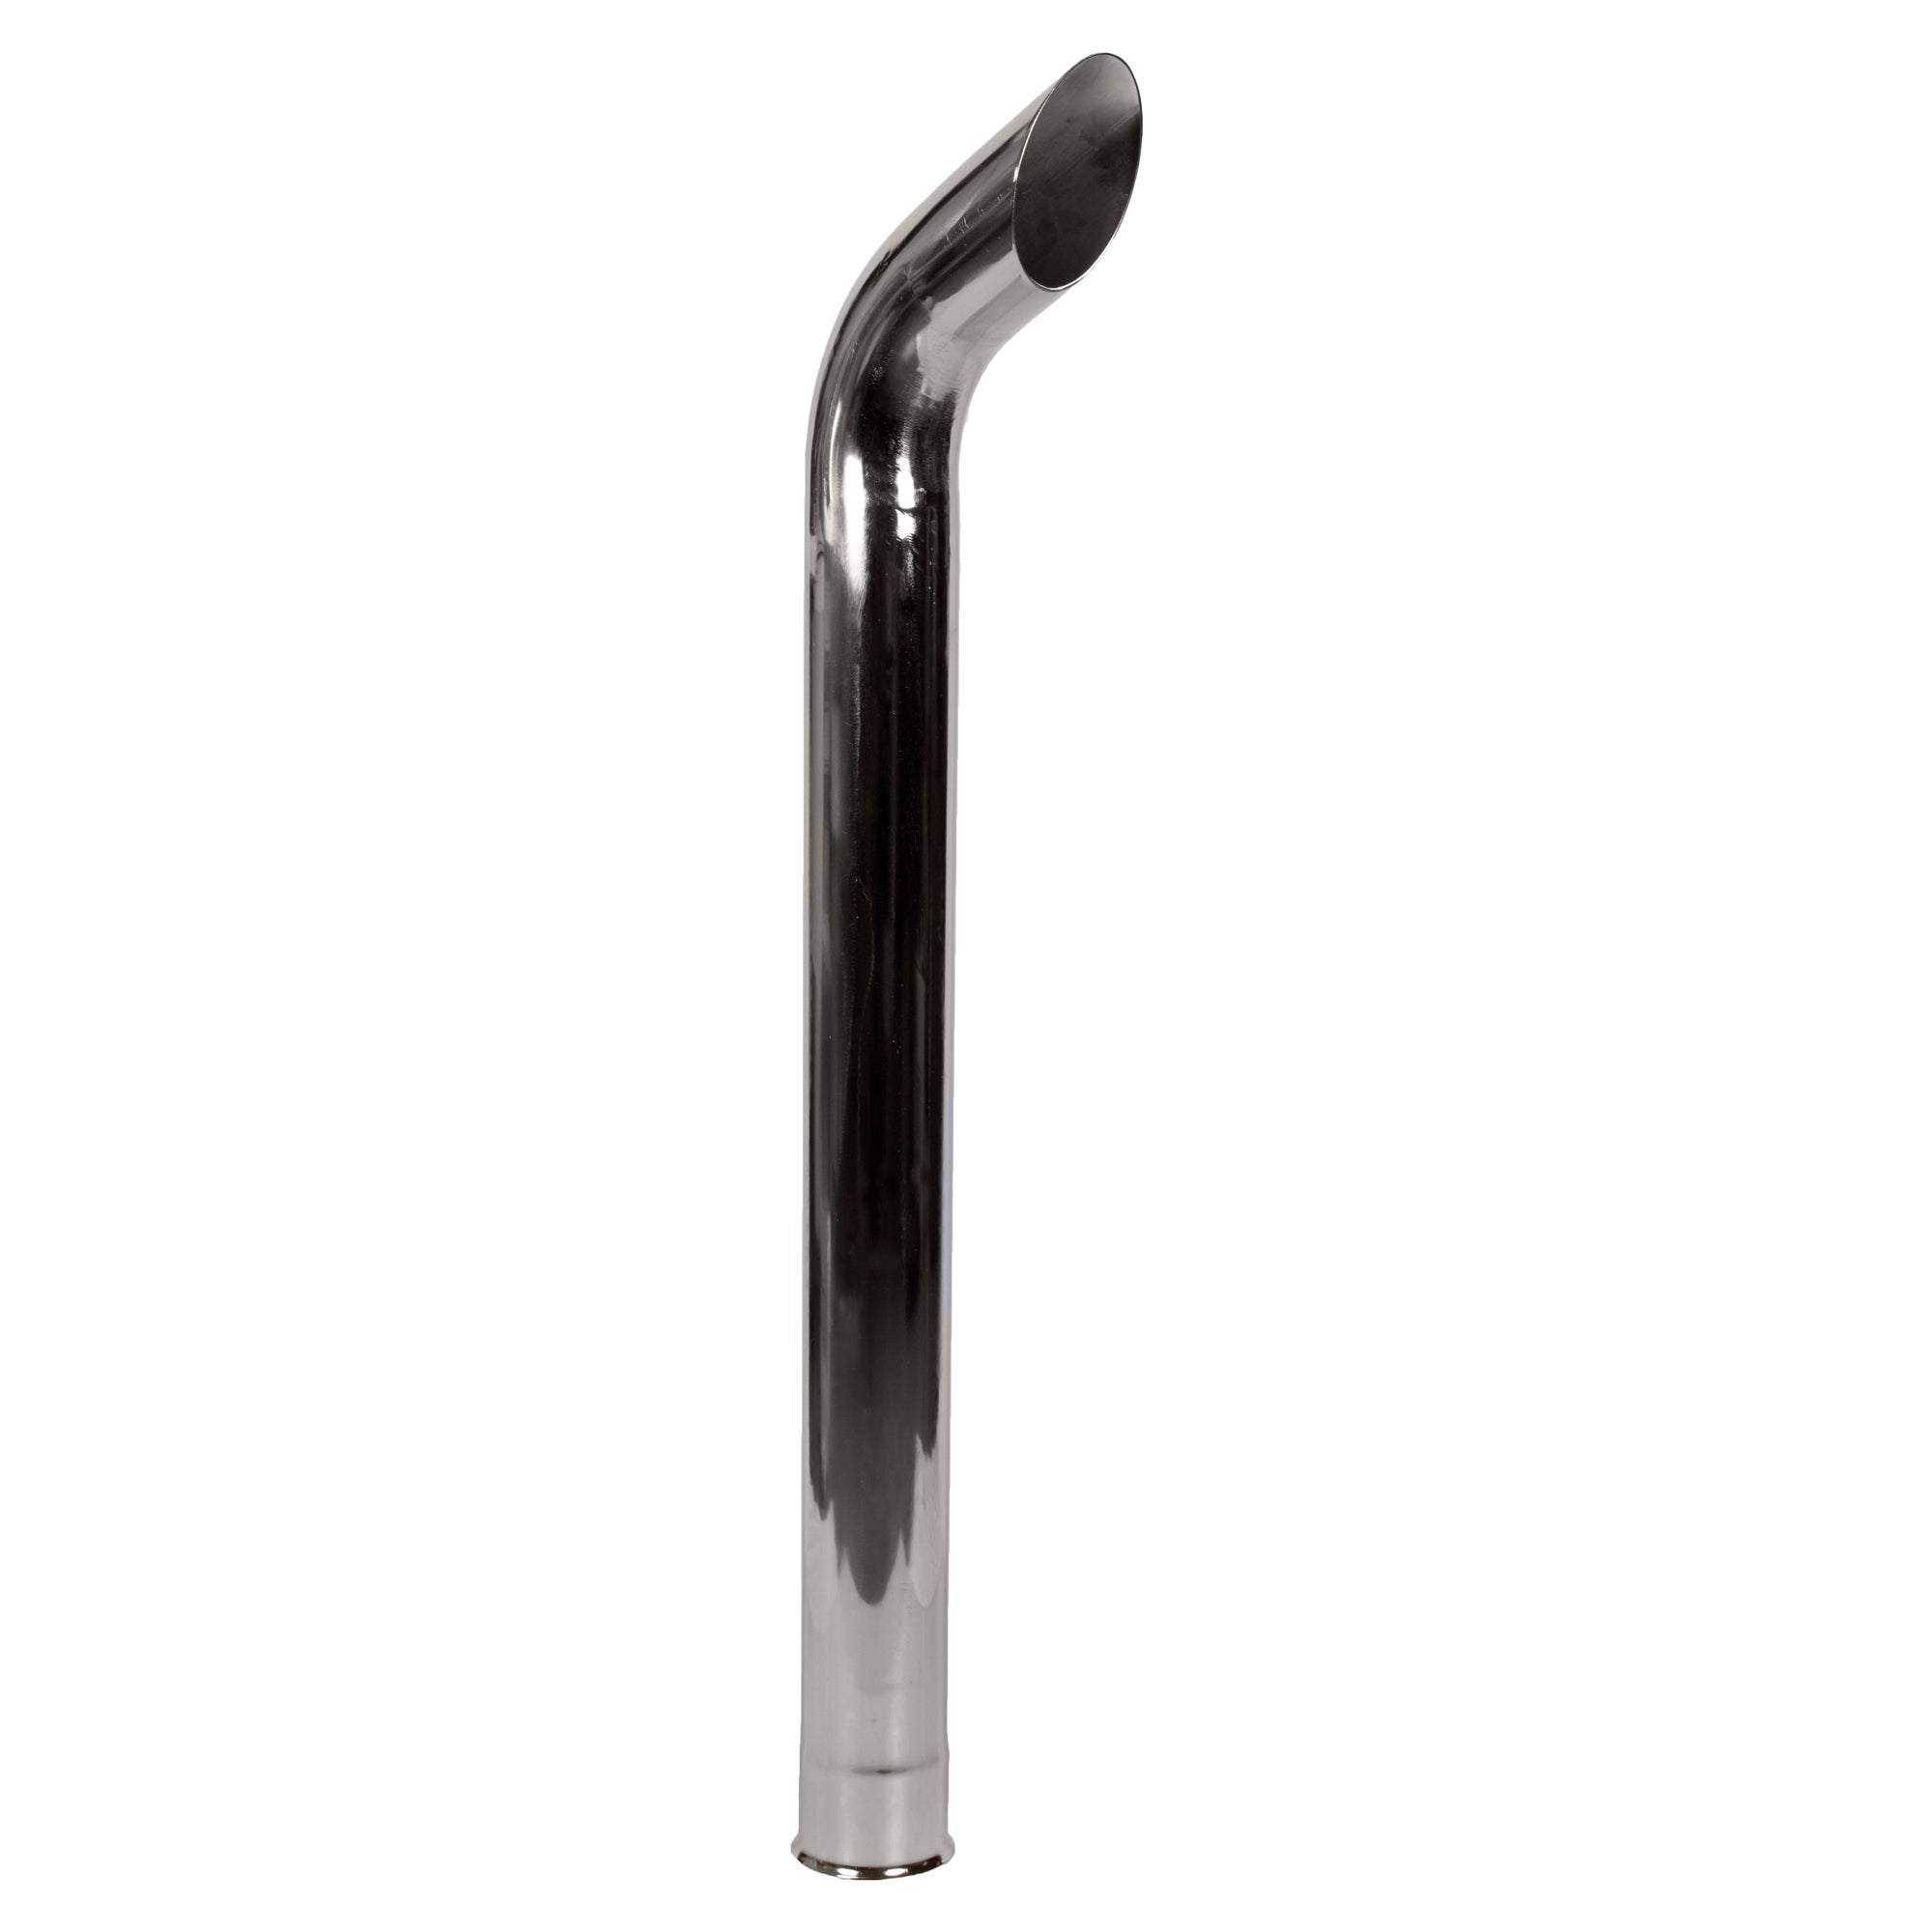 Exhaust Stack Pipe Replacement for UNIVERSAL - 3-15/16" x 48", Curved Chrome